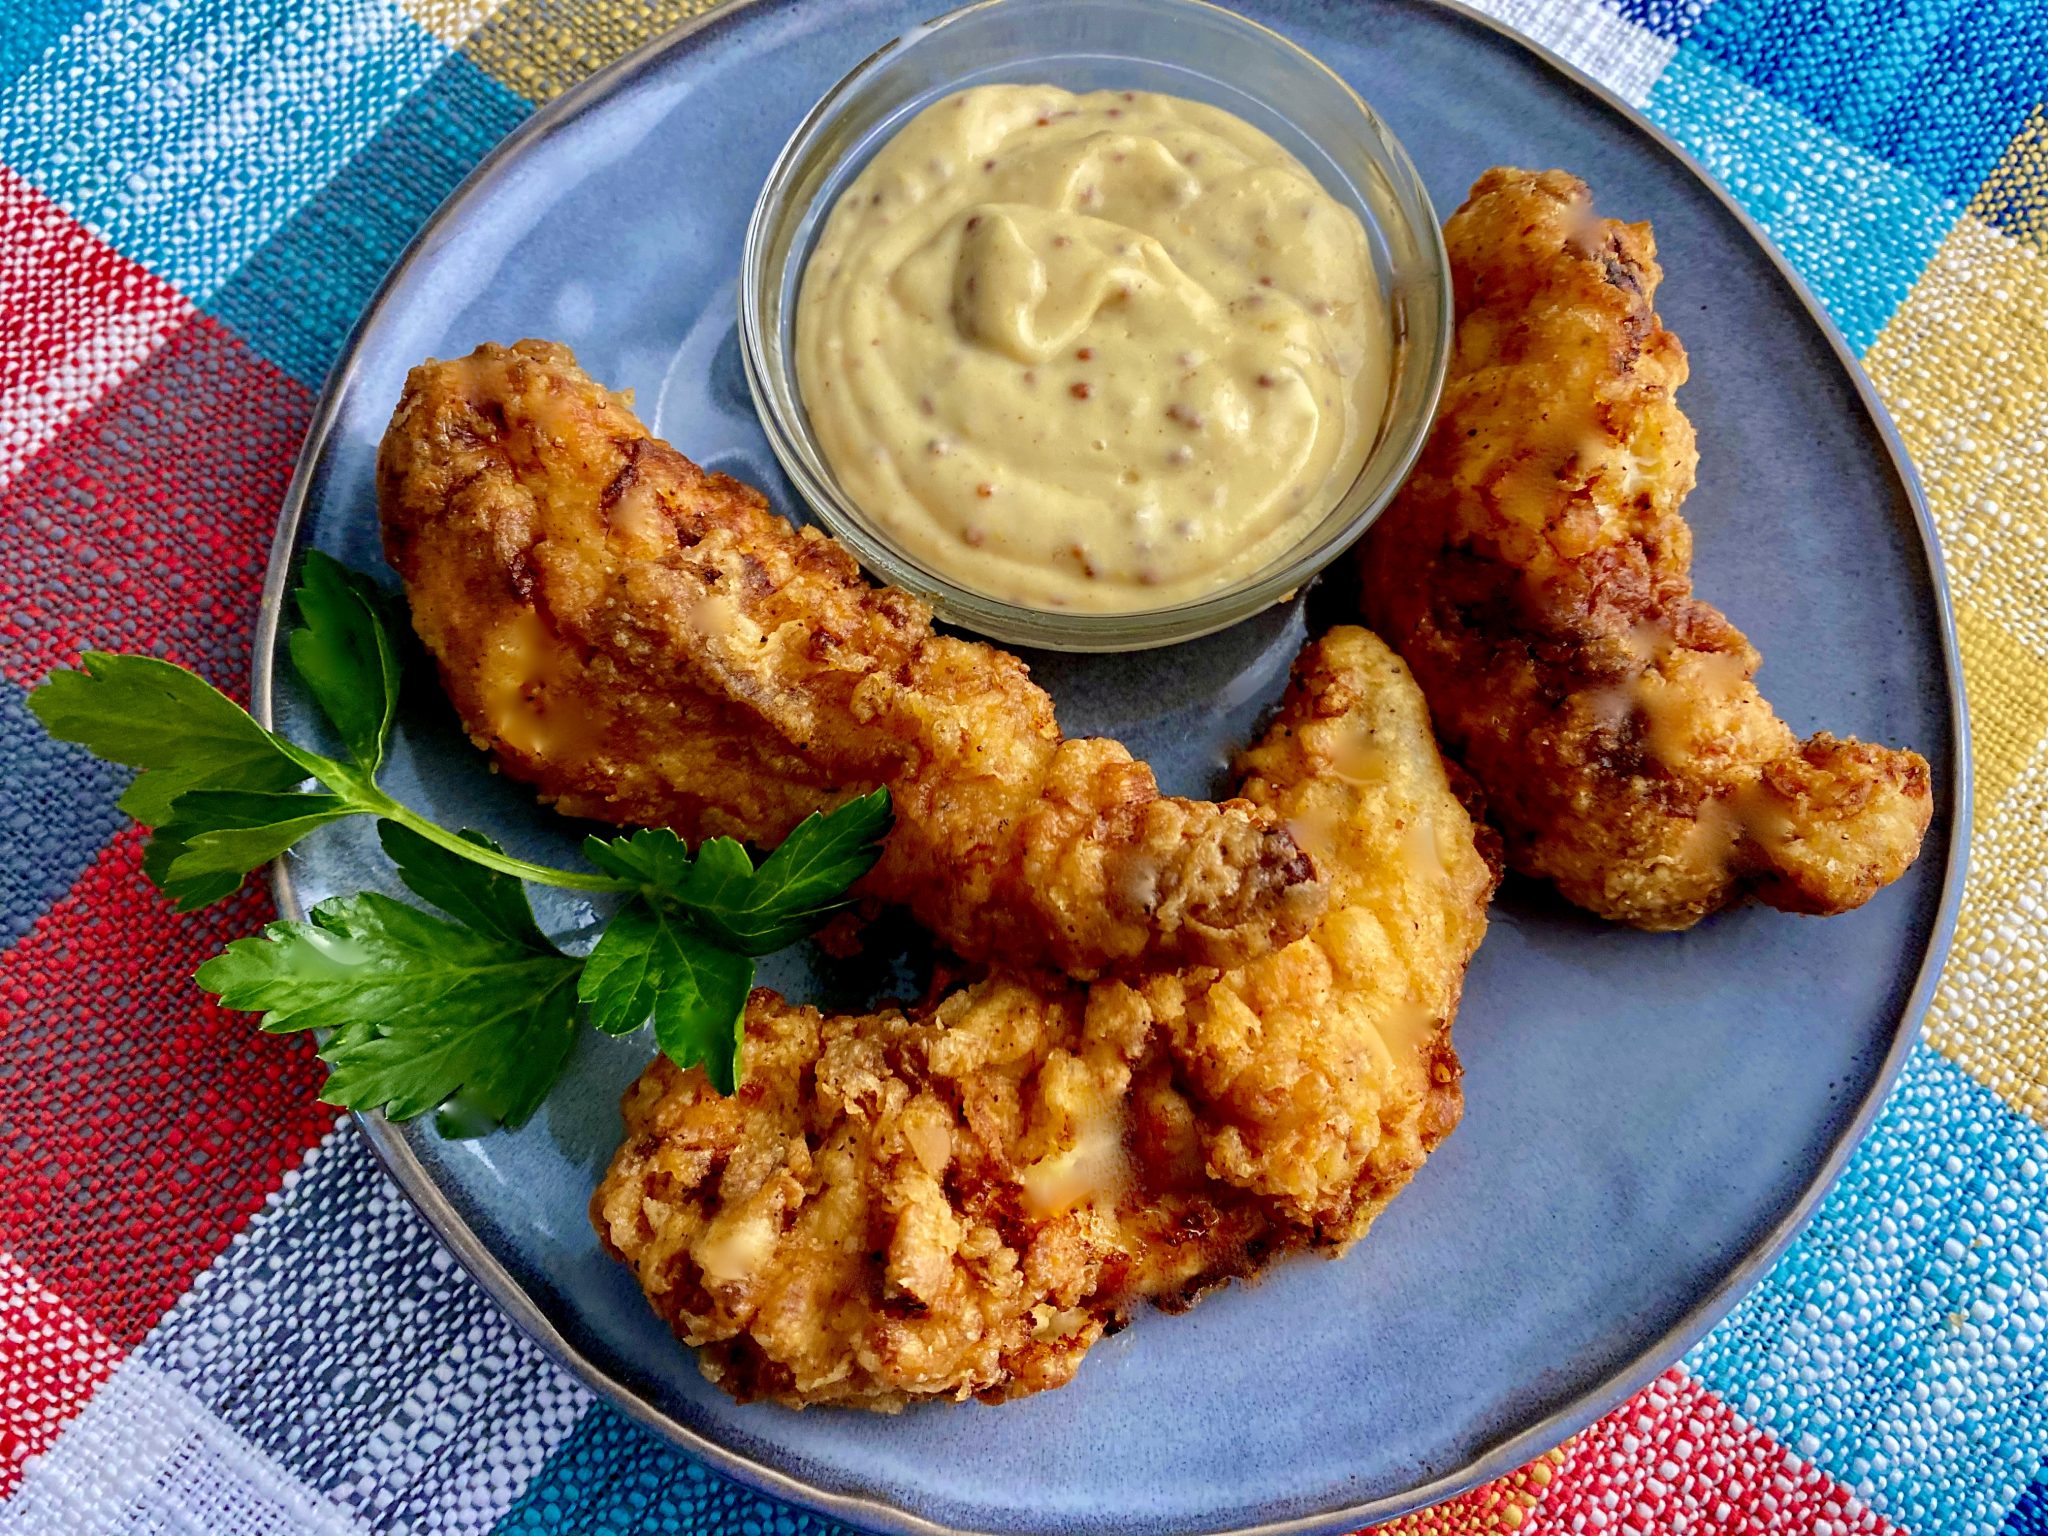 CHICKEN FINGERS WITH HONEY MUSTARD DIPPING SAUCE - Dish off the Block